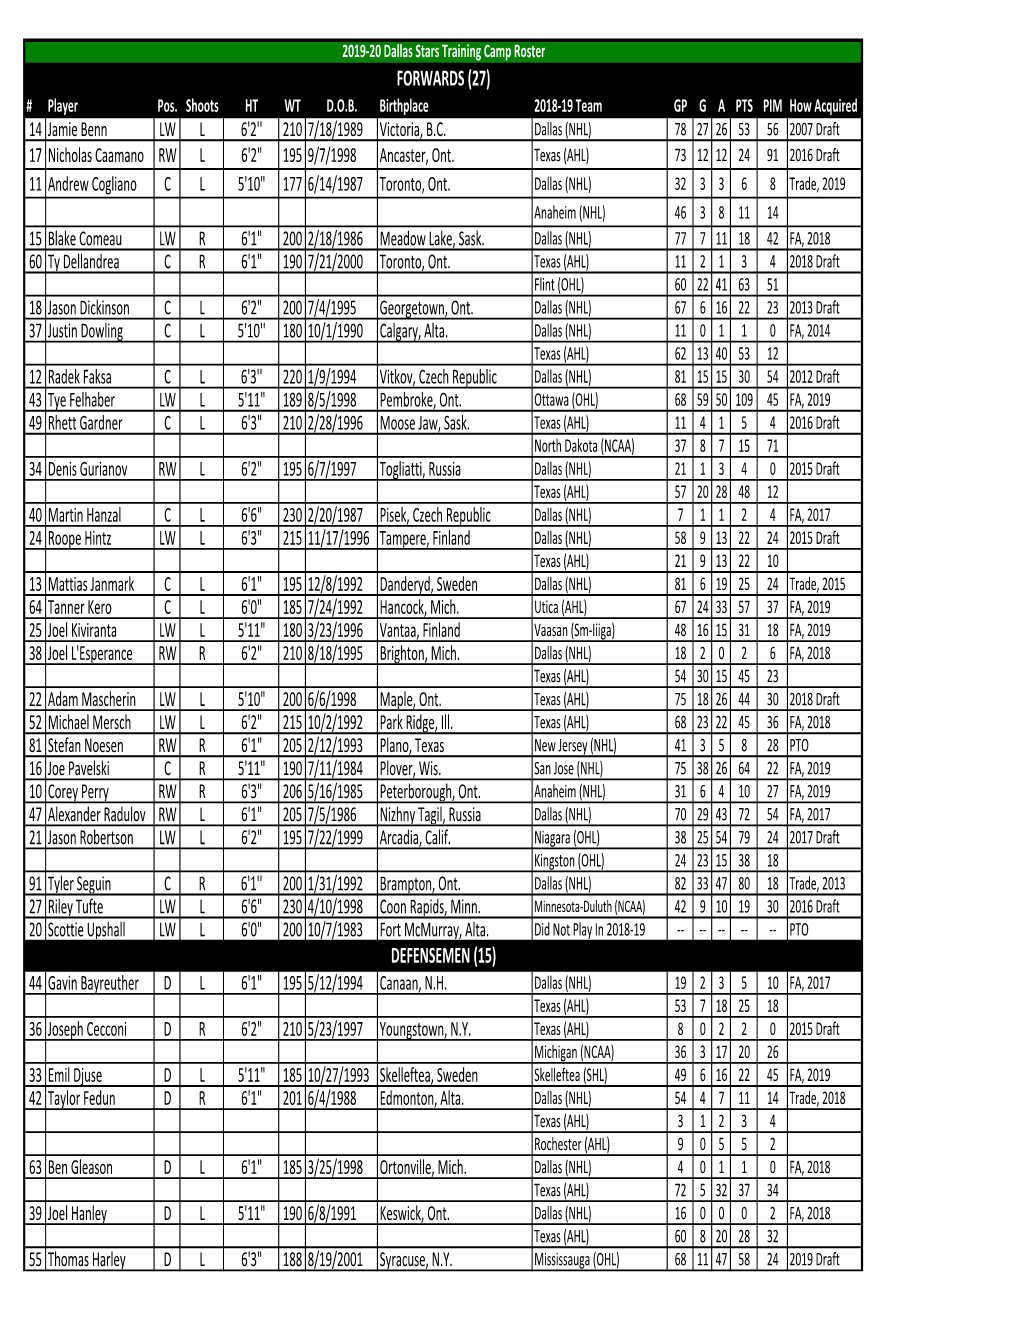 2019-20 Dallas Stars Training Camp Roster (As of Sept 20).Xlsx